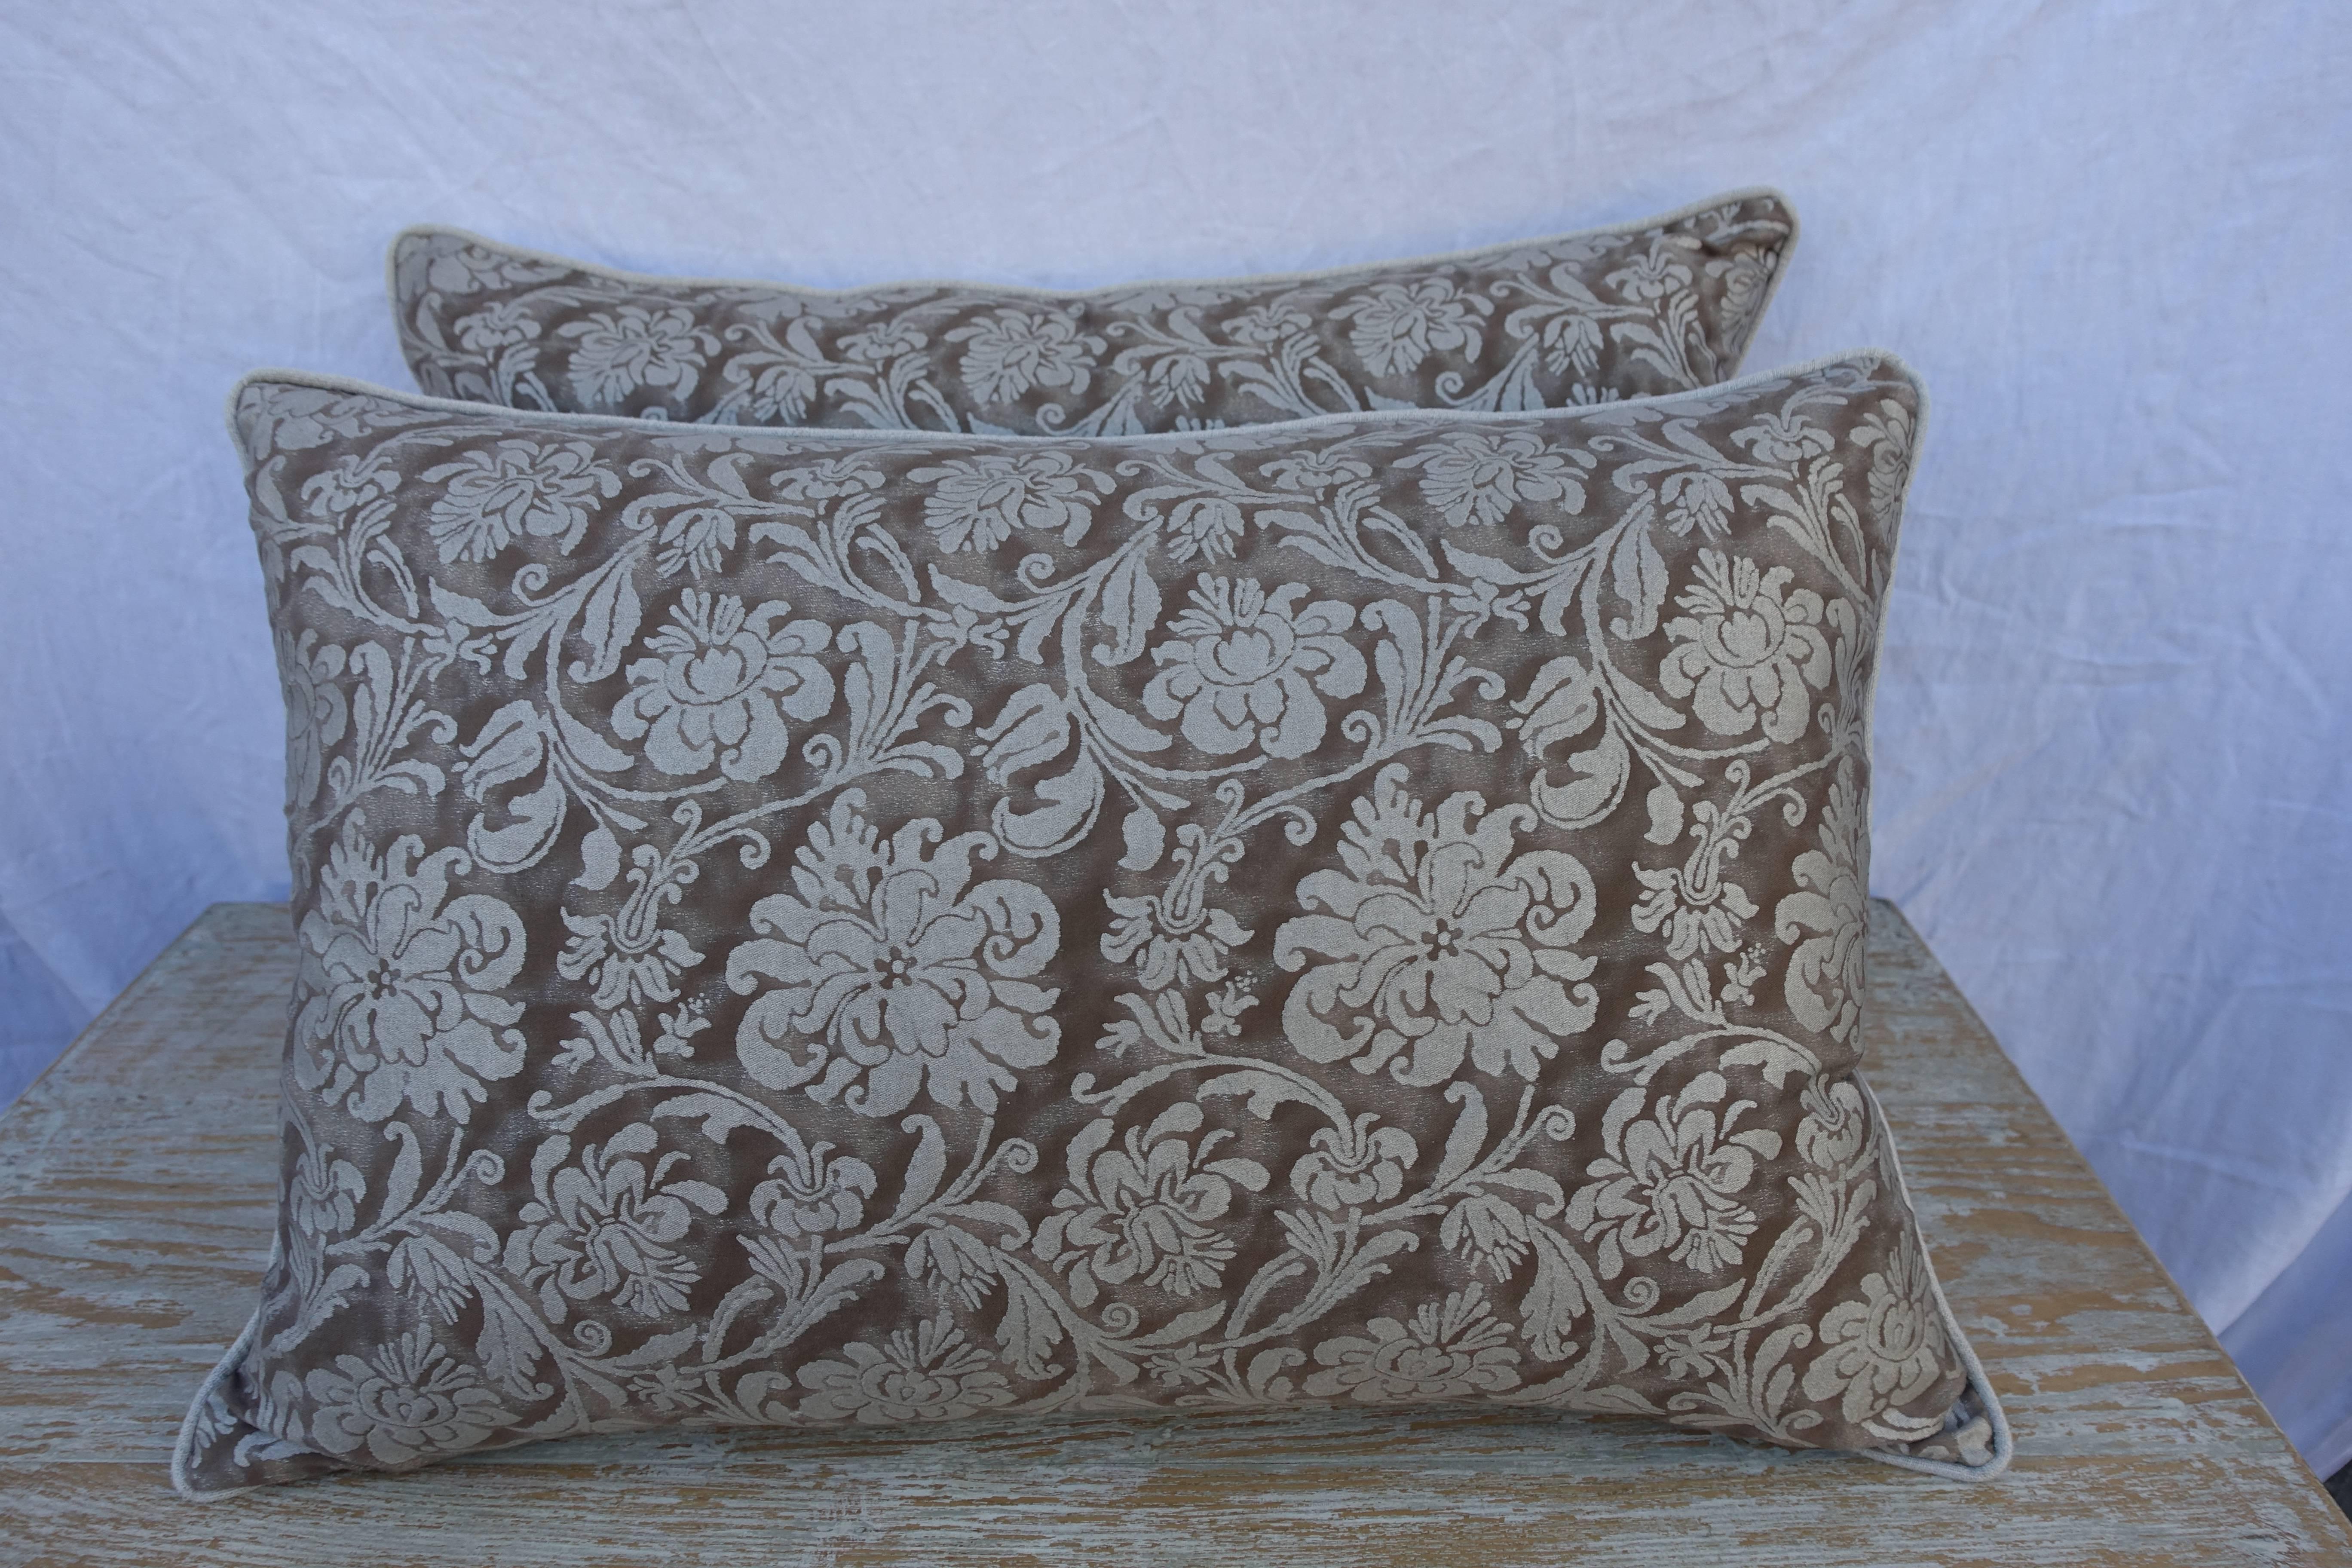 Custom pair of Italian Fortuny pillows made with Fortuny's Cimarosa patterned greyish brown and silvery gold printed cotton fronts and natural colored linen backs with a self welt detail. Down inserts, sewn closed.